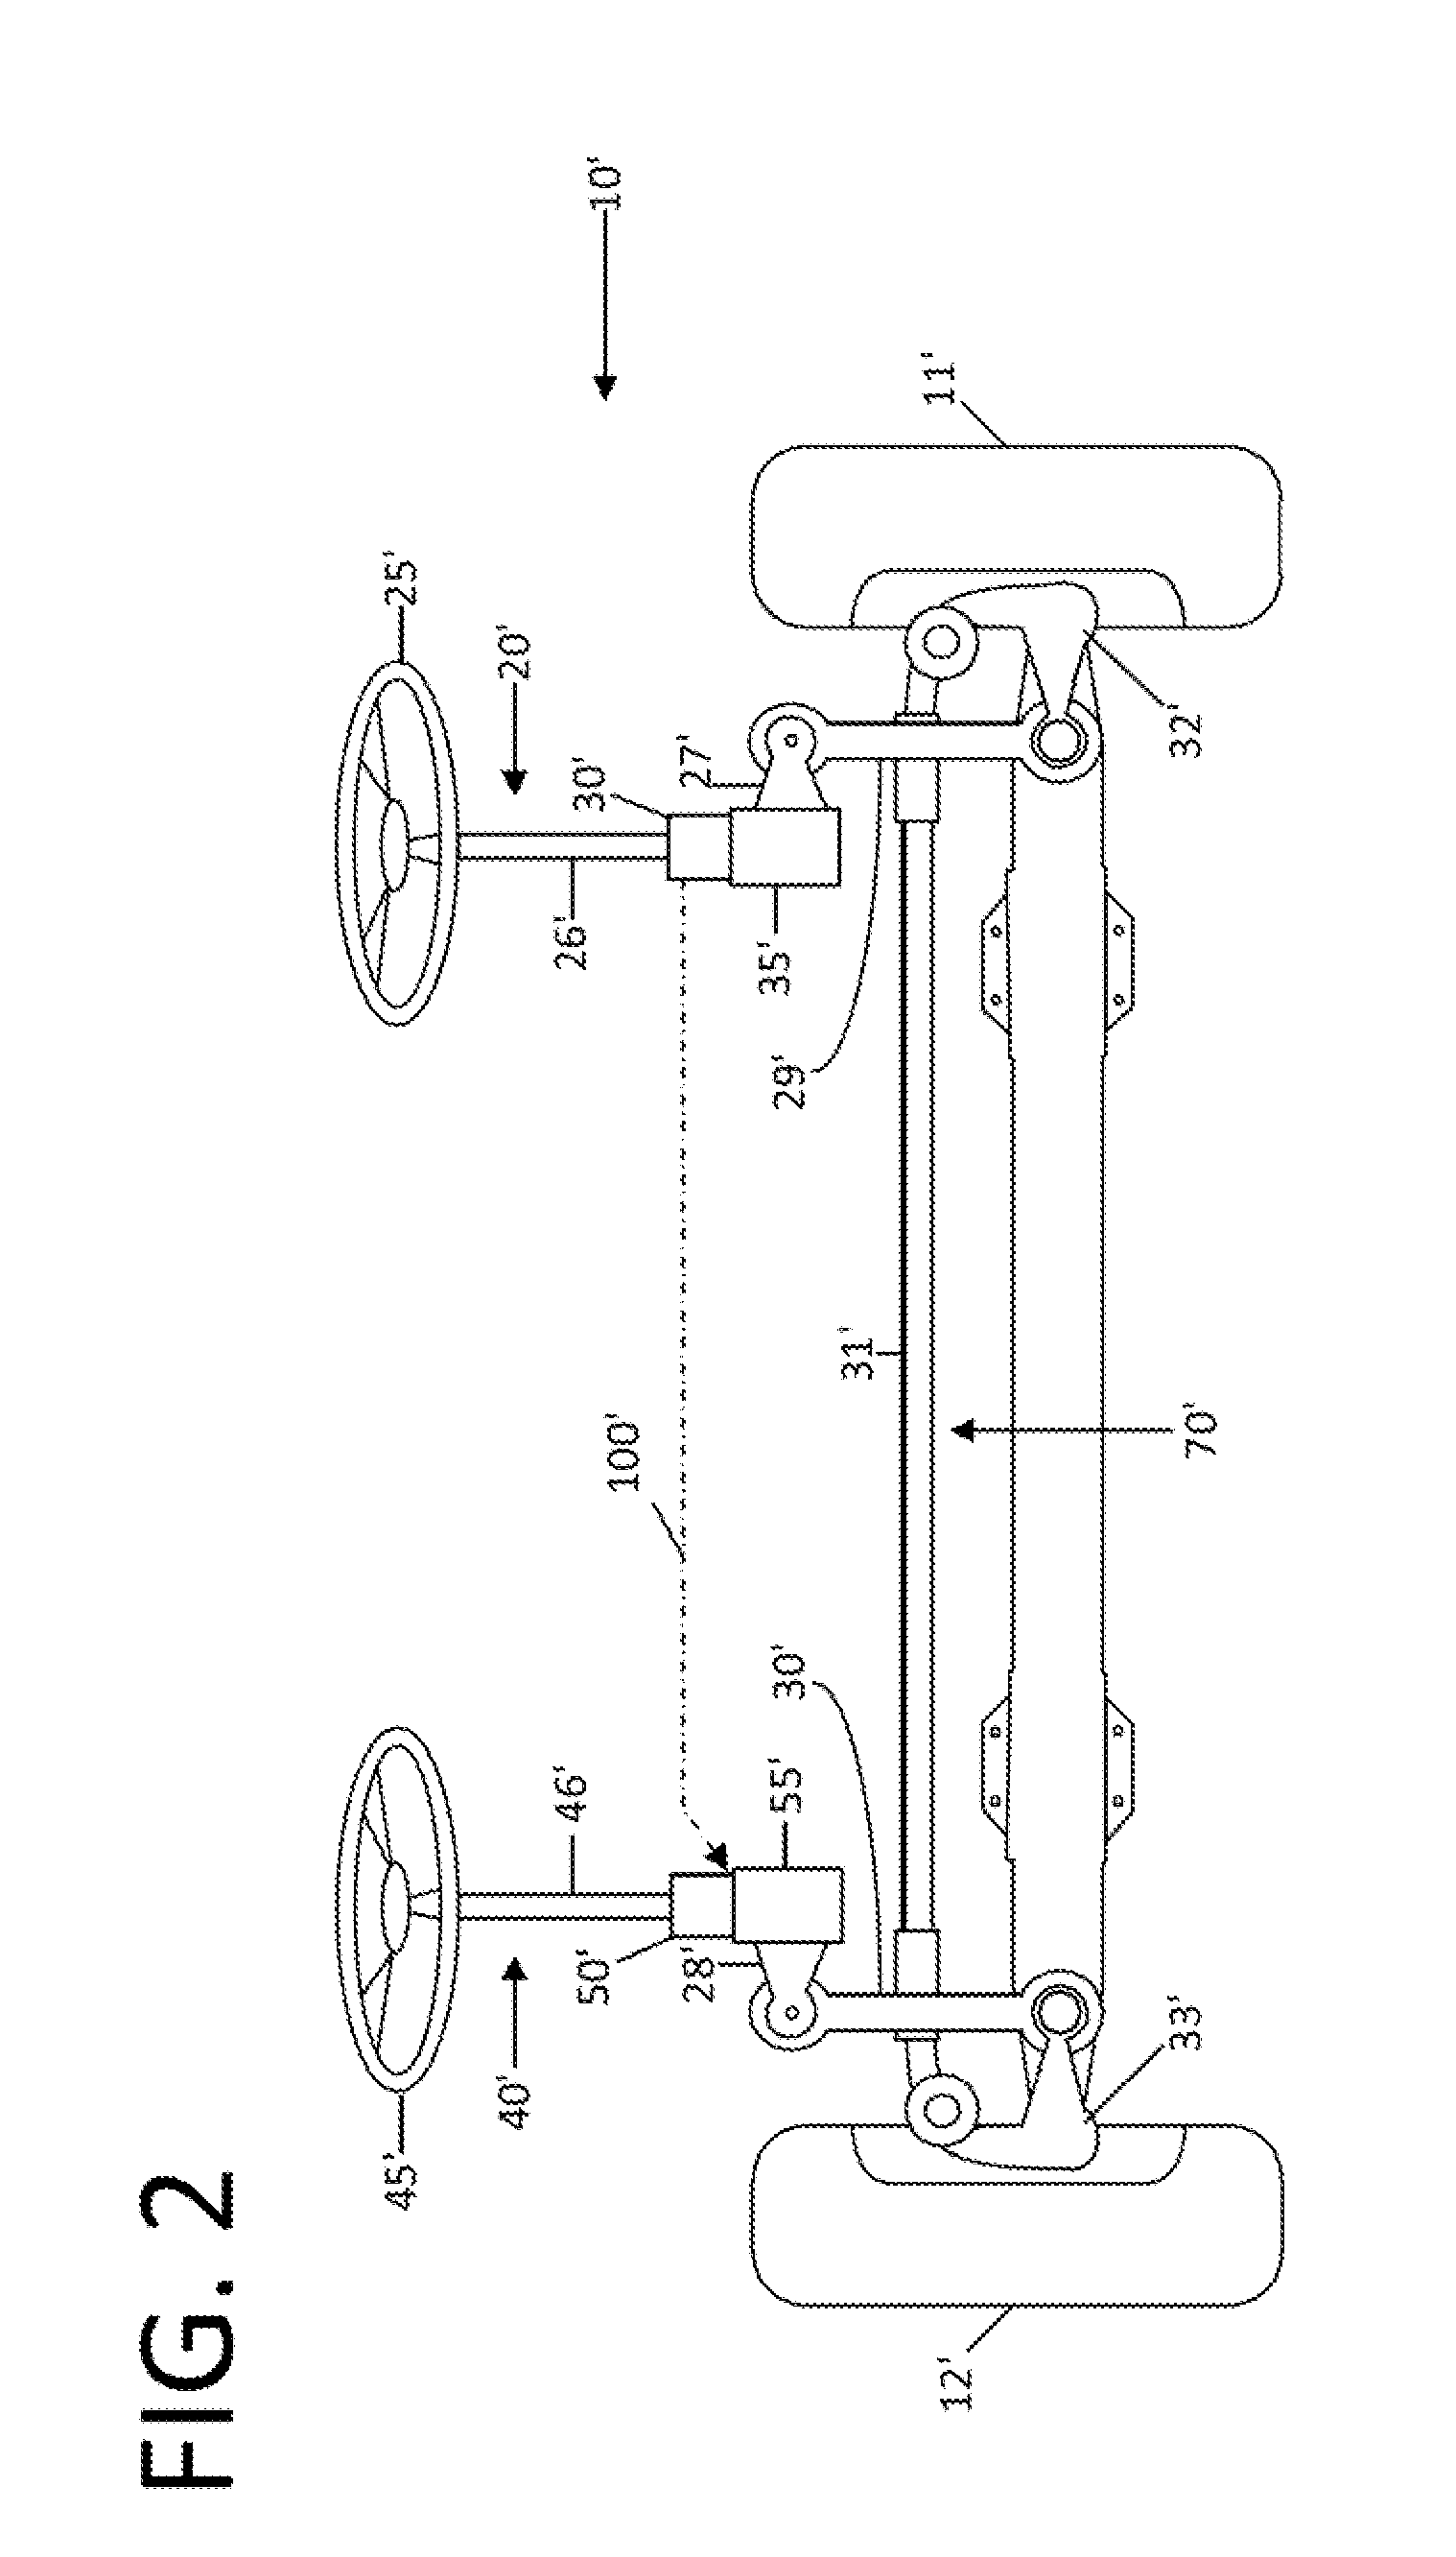 Dual steering system for a vehicle